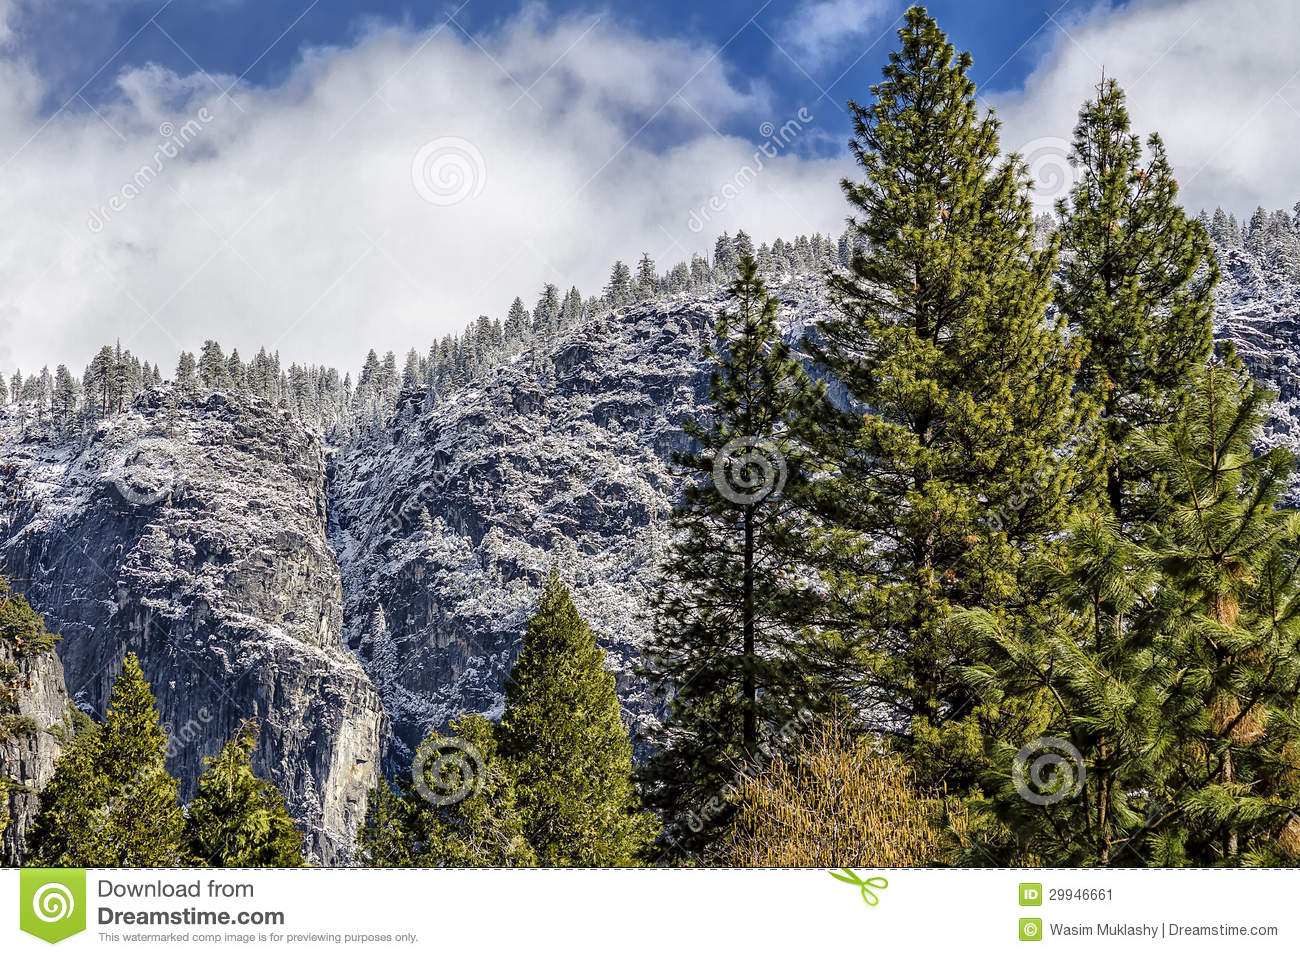 Now And Then In Yosemite  Stock Image   Image  29946661